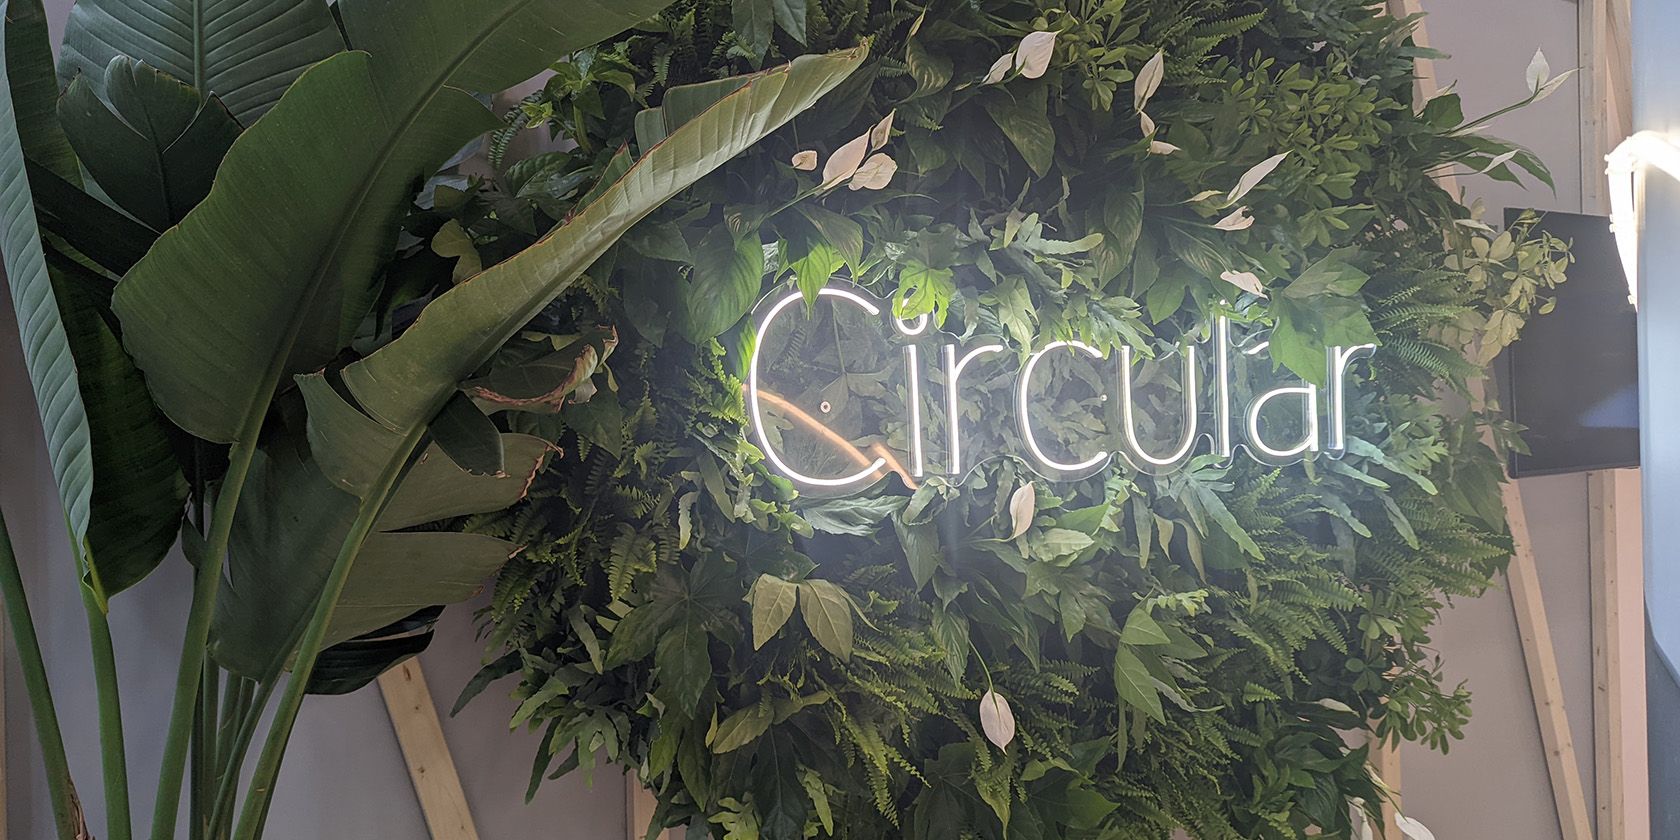 The Circular Logo in a Display of Leaves